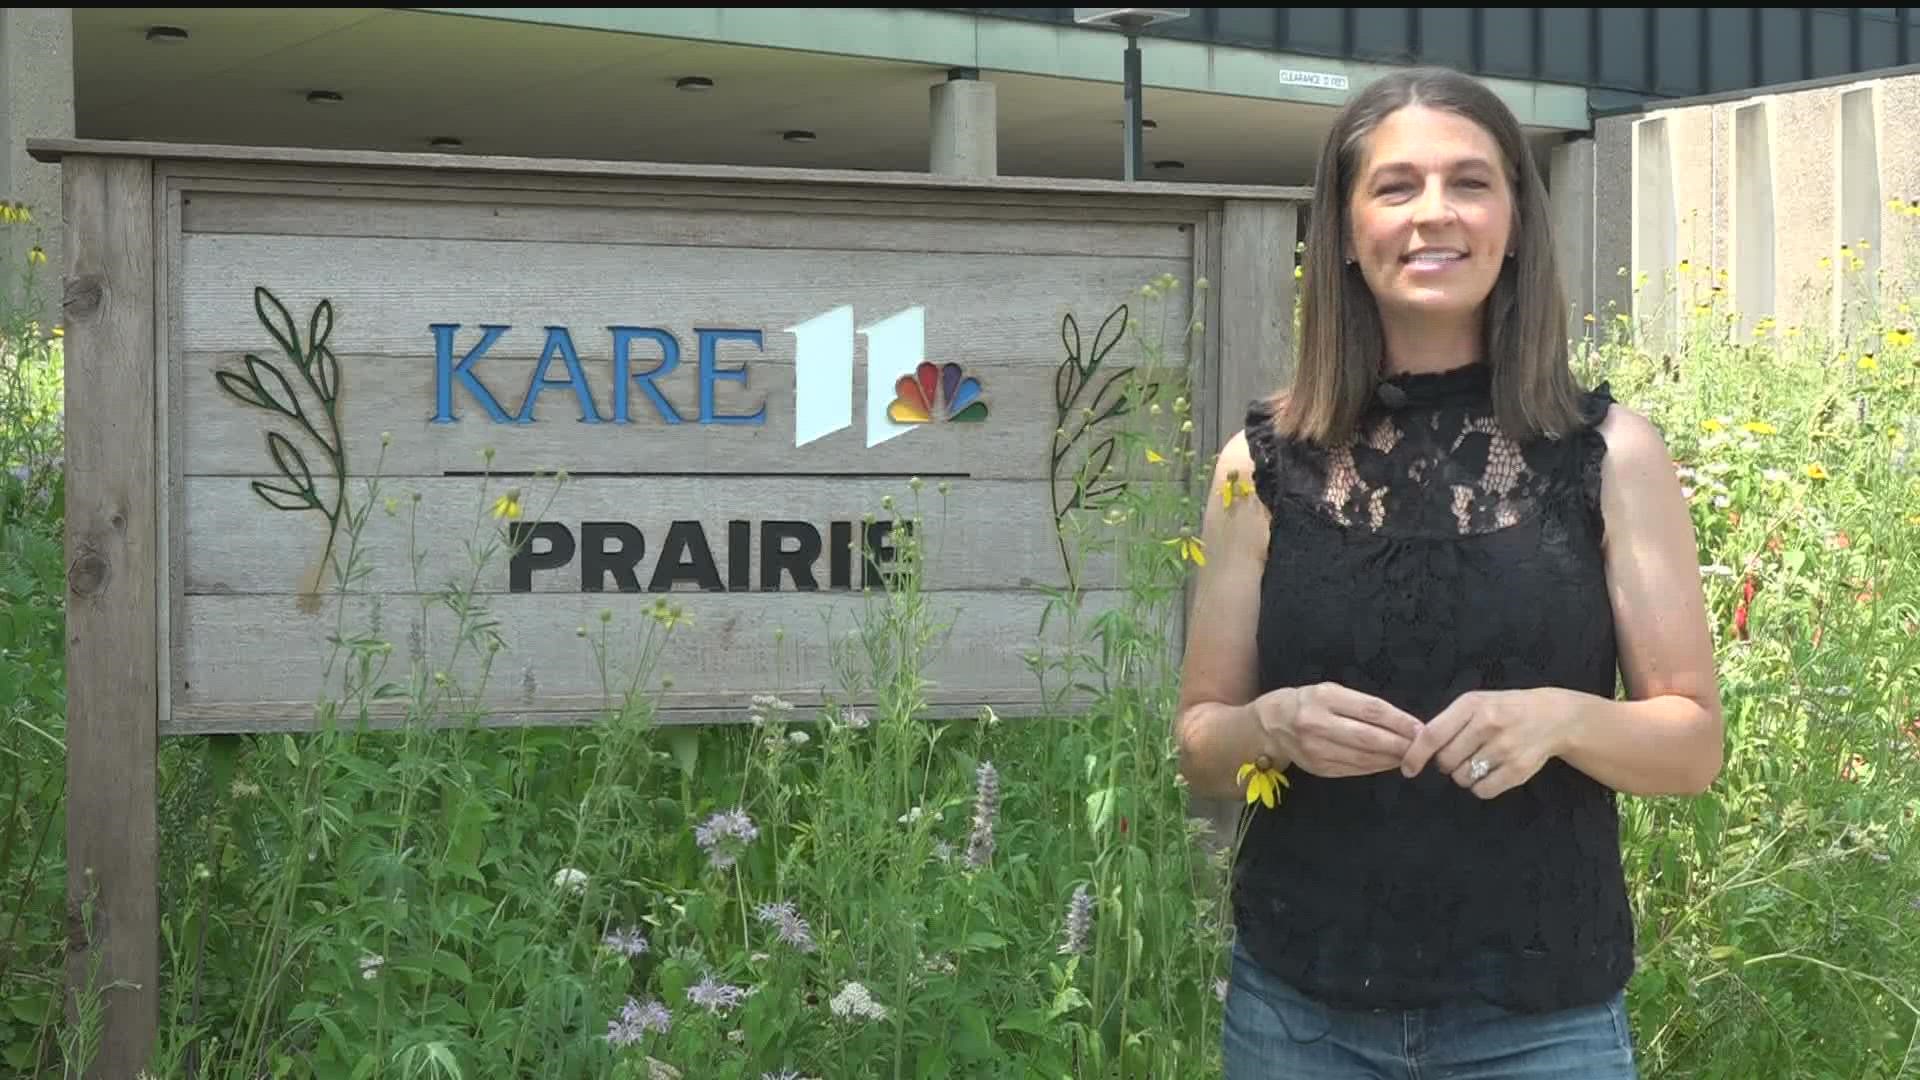 Meteorologist Laura Betker outlines the blooms coming in right outside the KARE 11 station.